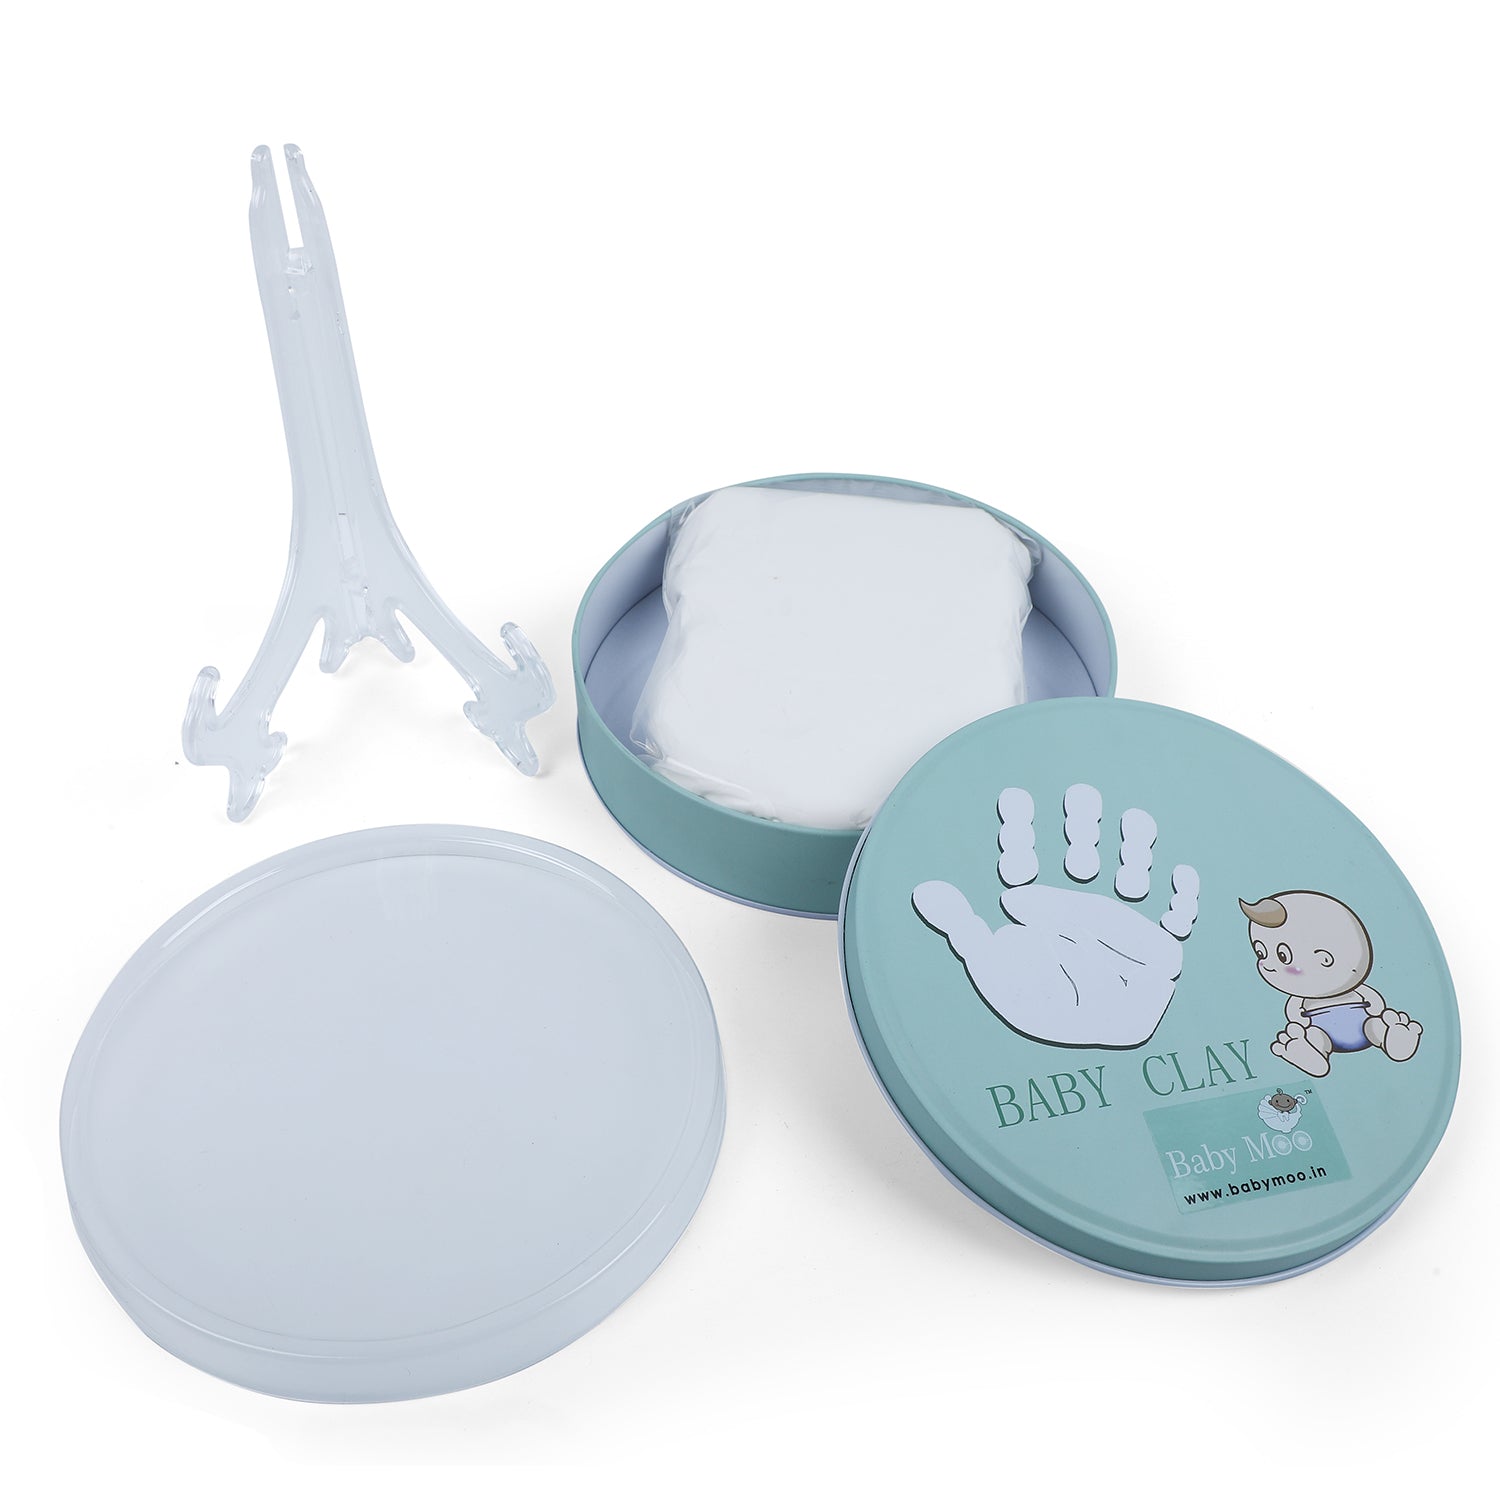 Baby Moo Handprint And Footprint Impression Keepsake DIY Kit With Plate And Stand - White